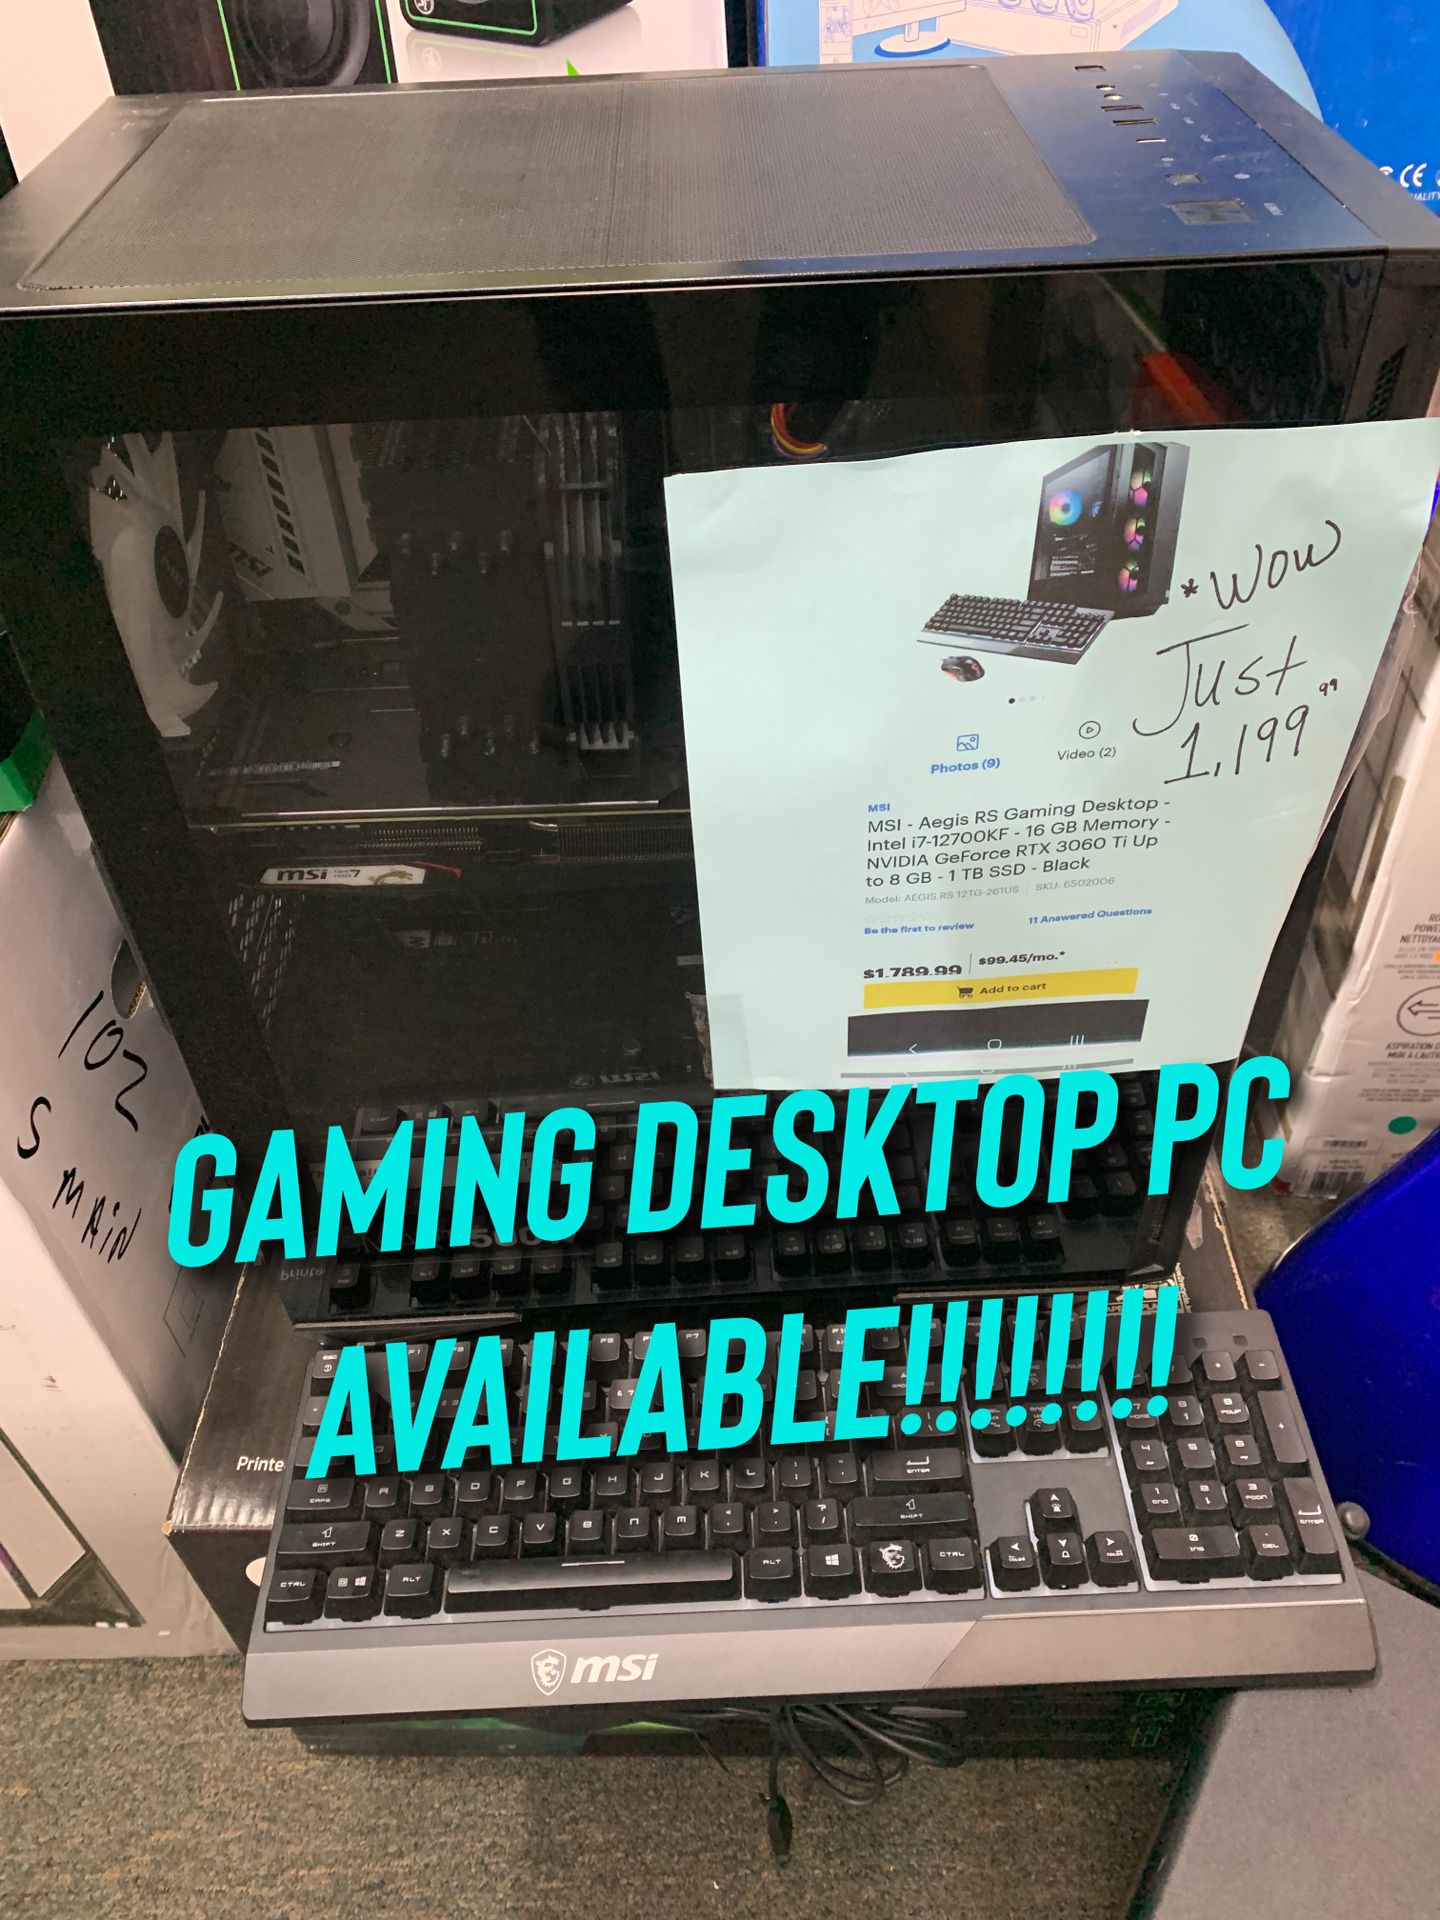 GAMING DESKTOP PC AVAILABLE!!!!!!!!